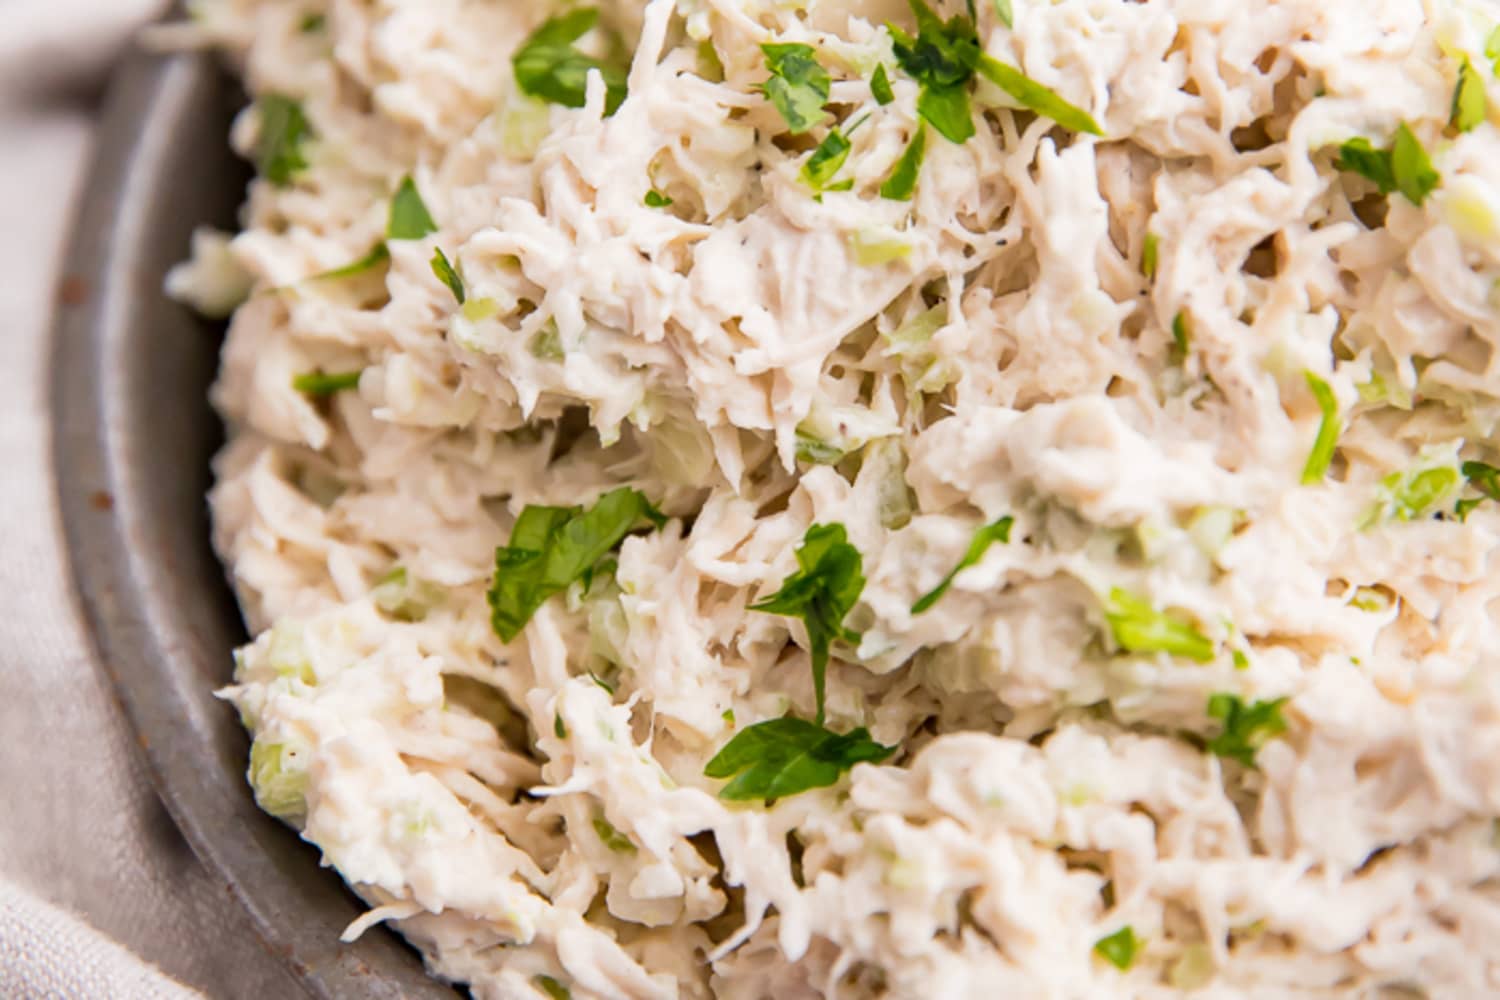 Costco-Style Shredded Chicken Salad Recipe - 40 Aprons | The Kitchn